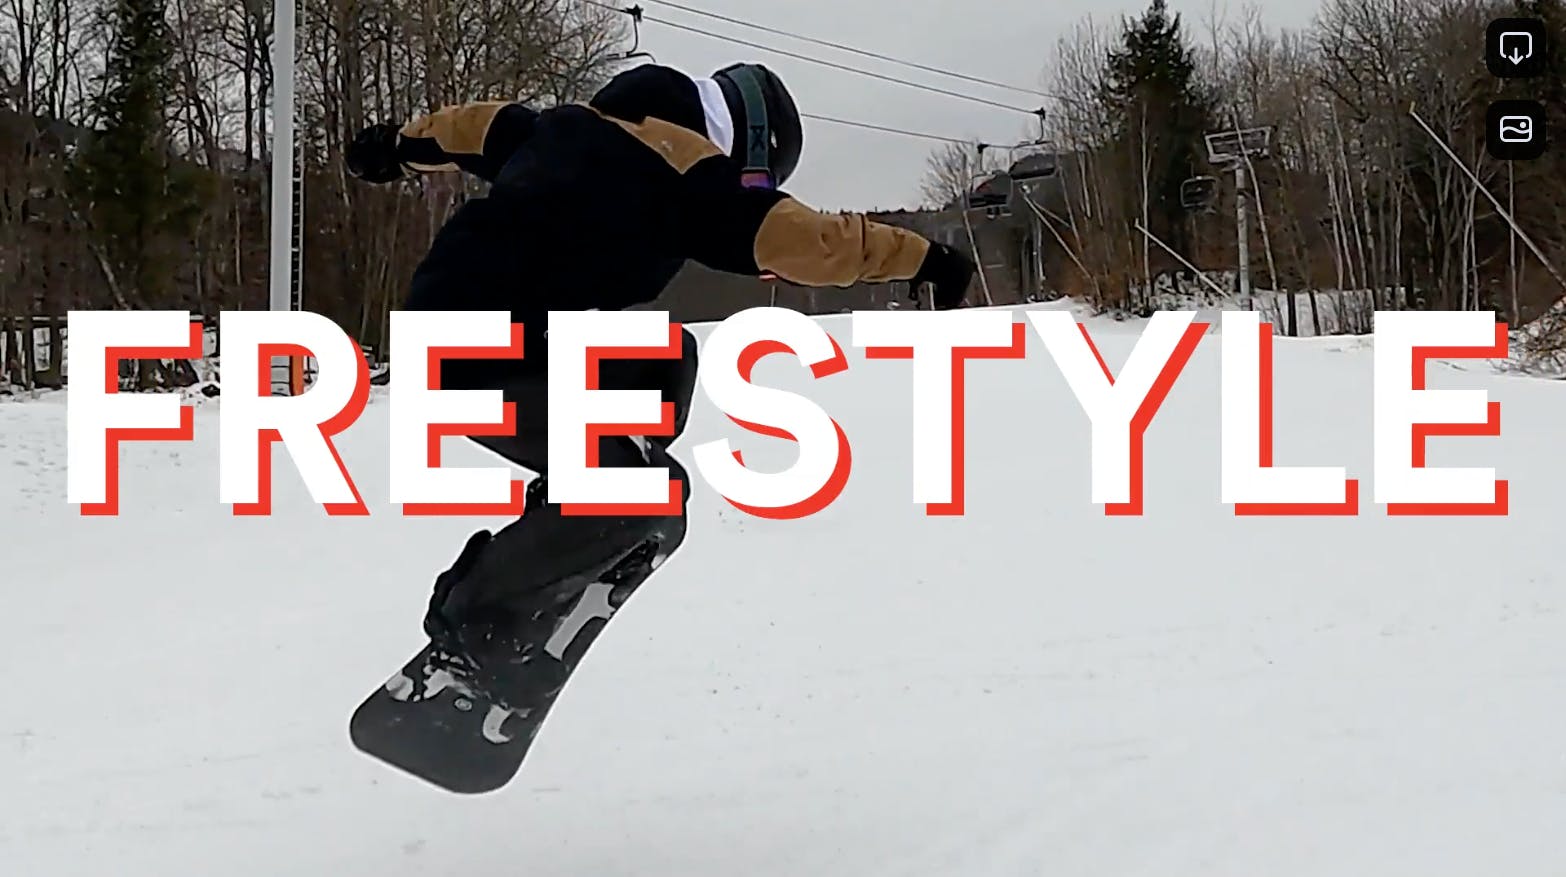 Curated expert Colby executing a jump with his snowboard with a "Freestyle" graphic over the image